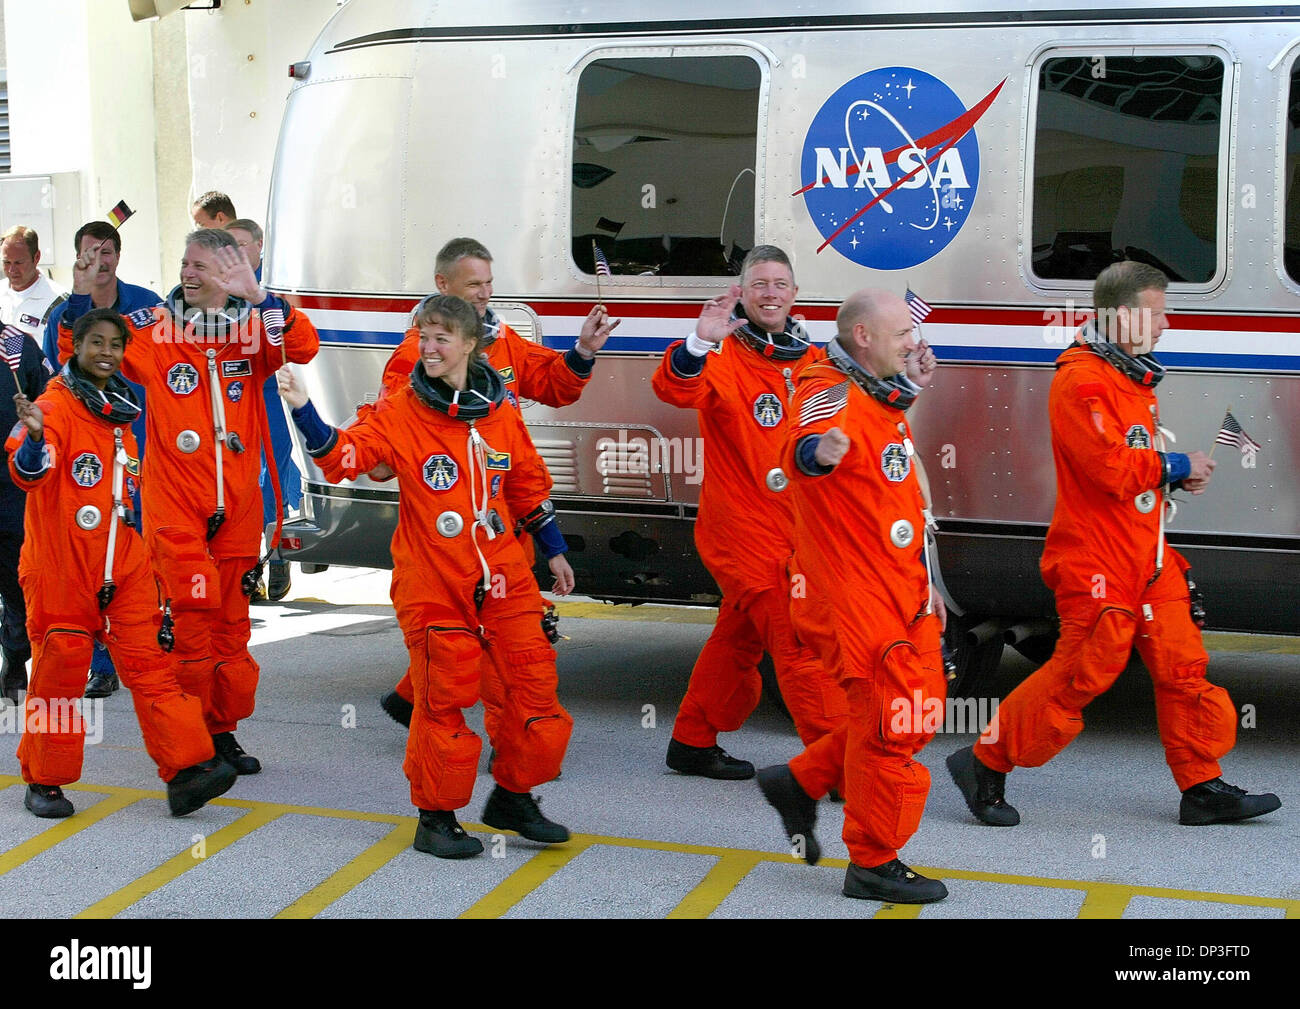 Jul 04, 2006; Cape Canaveral, FL, USA; Space shuttle Discovery crew members walk out Tuesday morning waving American and German flags on their way to the space craft at Kennedy Space Center. (L-R) Mission Specialists Astronauts STEPHANIE WILSON, THOMAS REITER of Germany, LISA NOWAK and PIERS SELLERS, Pilot MARK KELLY, Mission Specialist MICHAEL FOSSUM and commander STEVEN LINDSEY.  Stock Photo